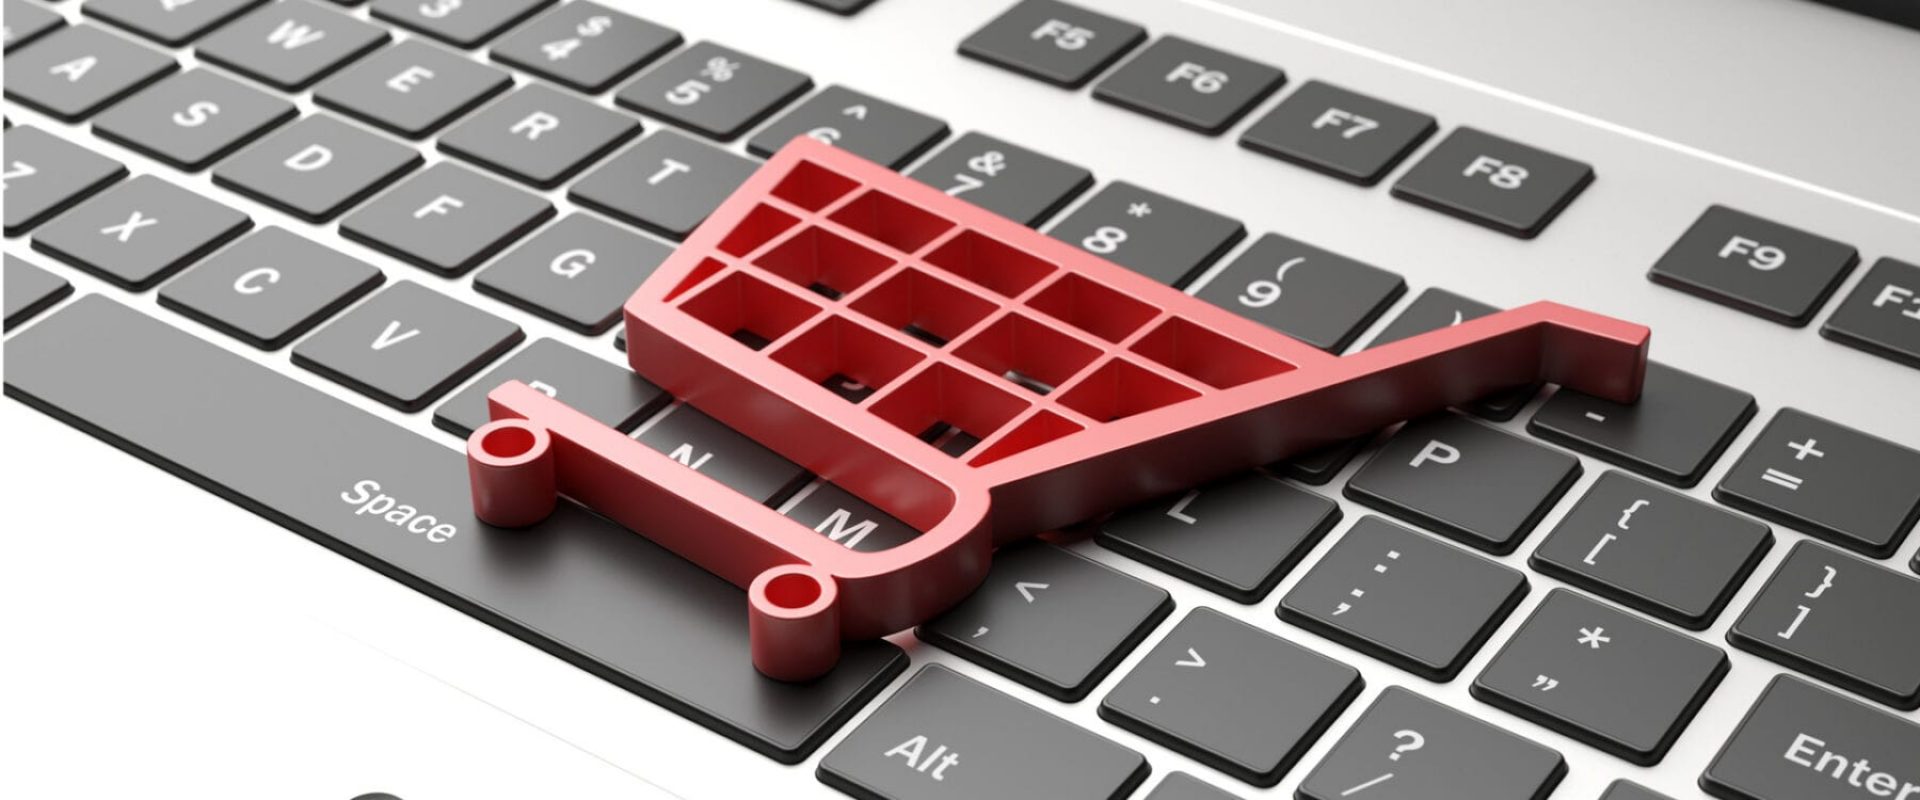 18% eCommerce Growth Expected in 2020, Despite the Pandemic